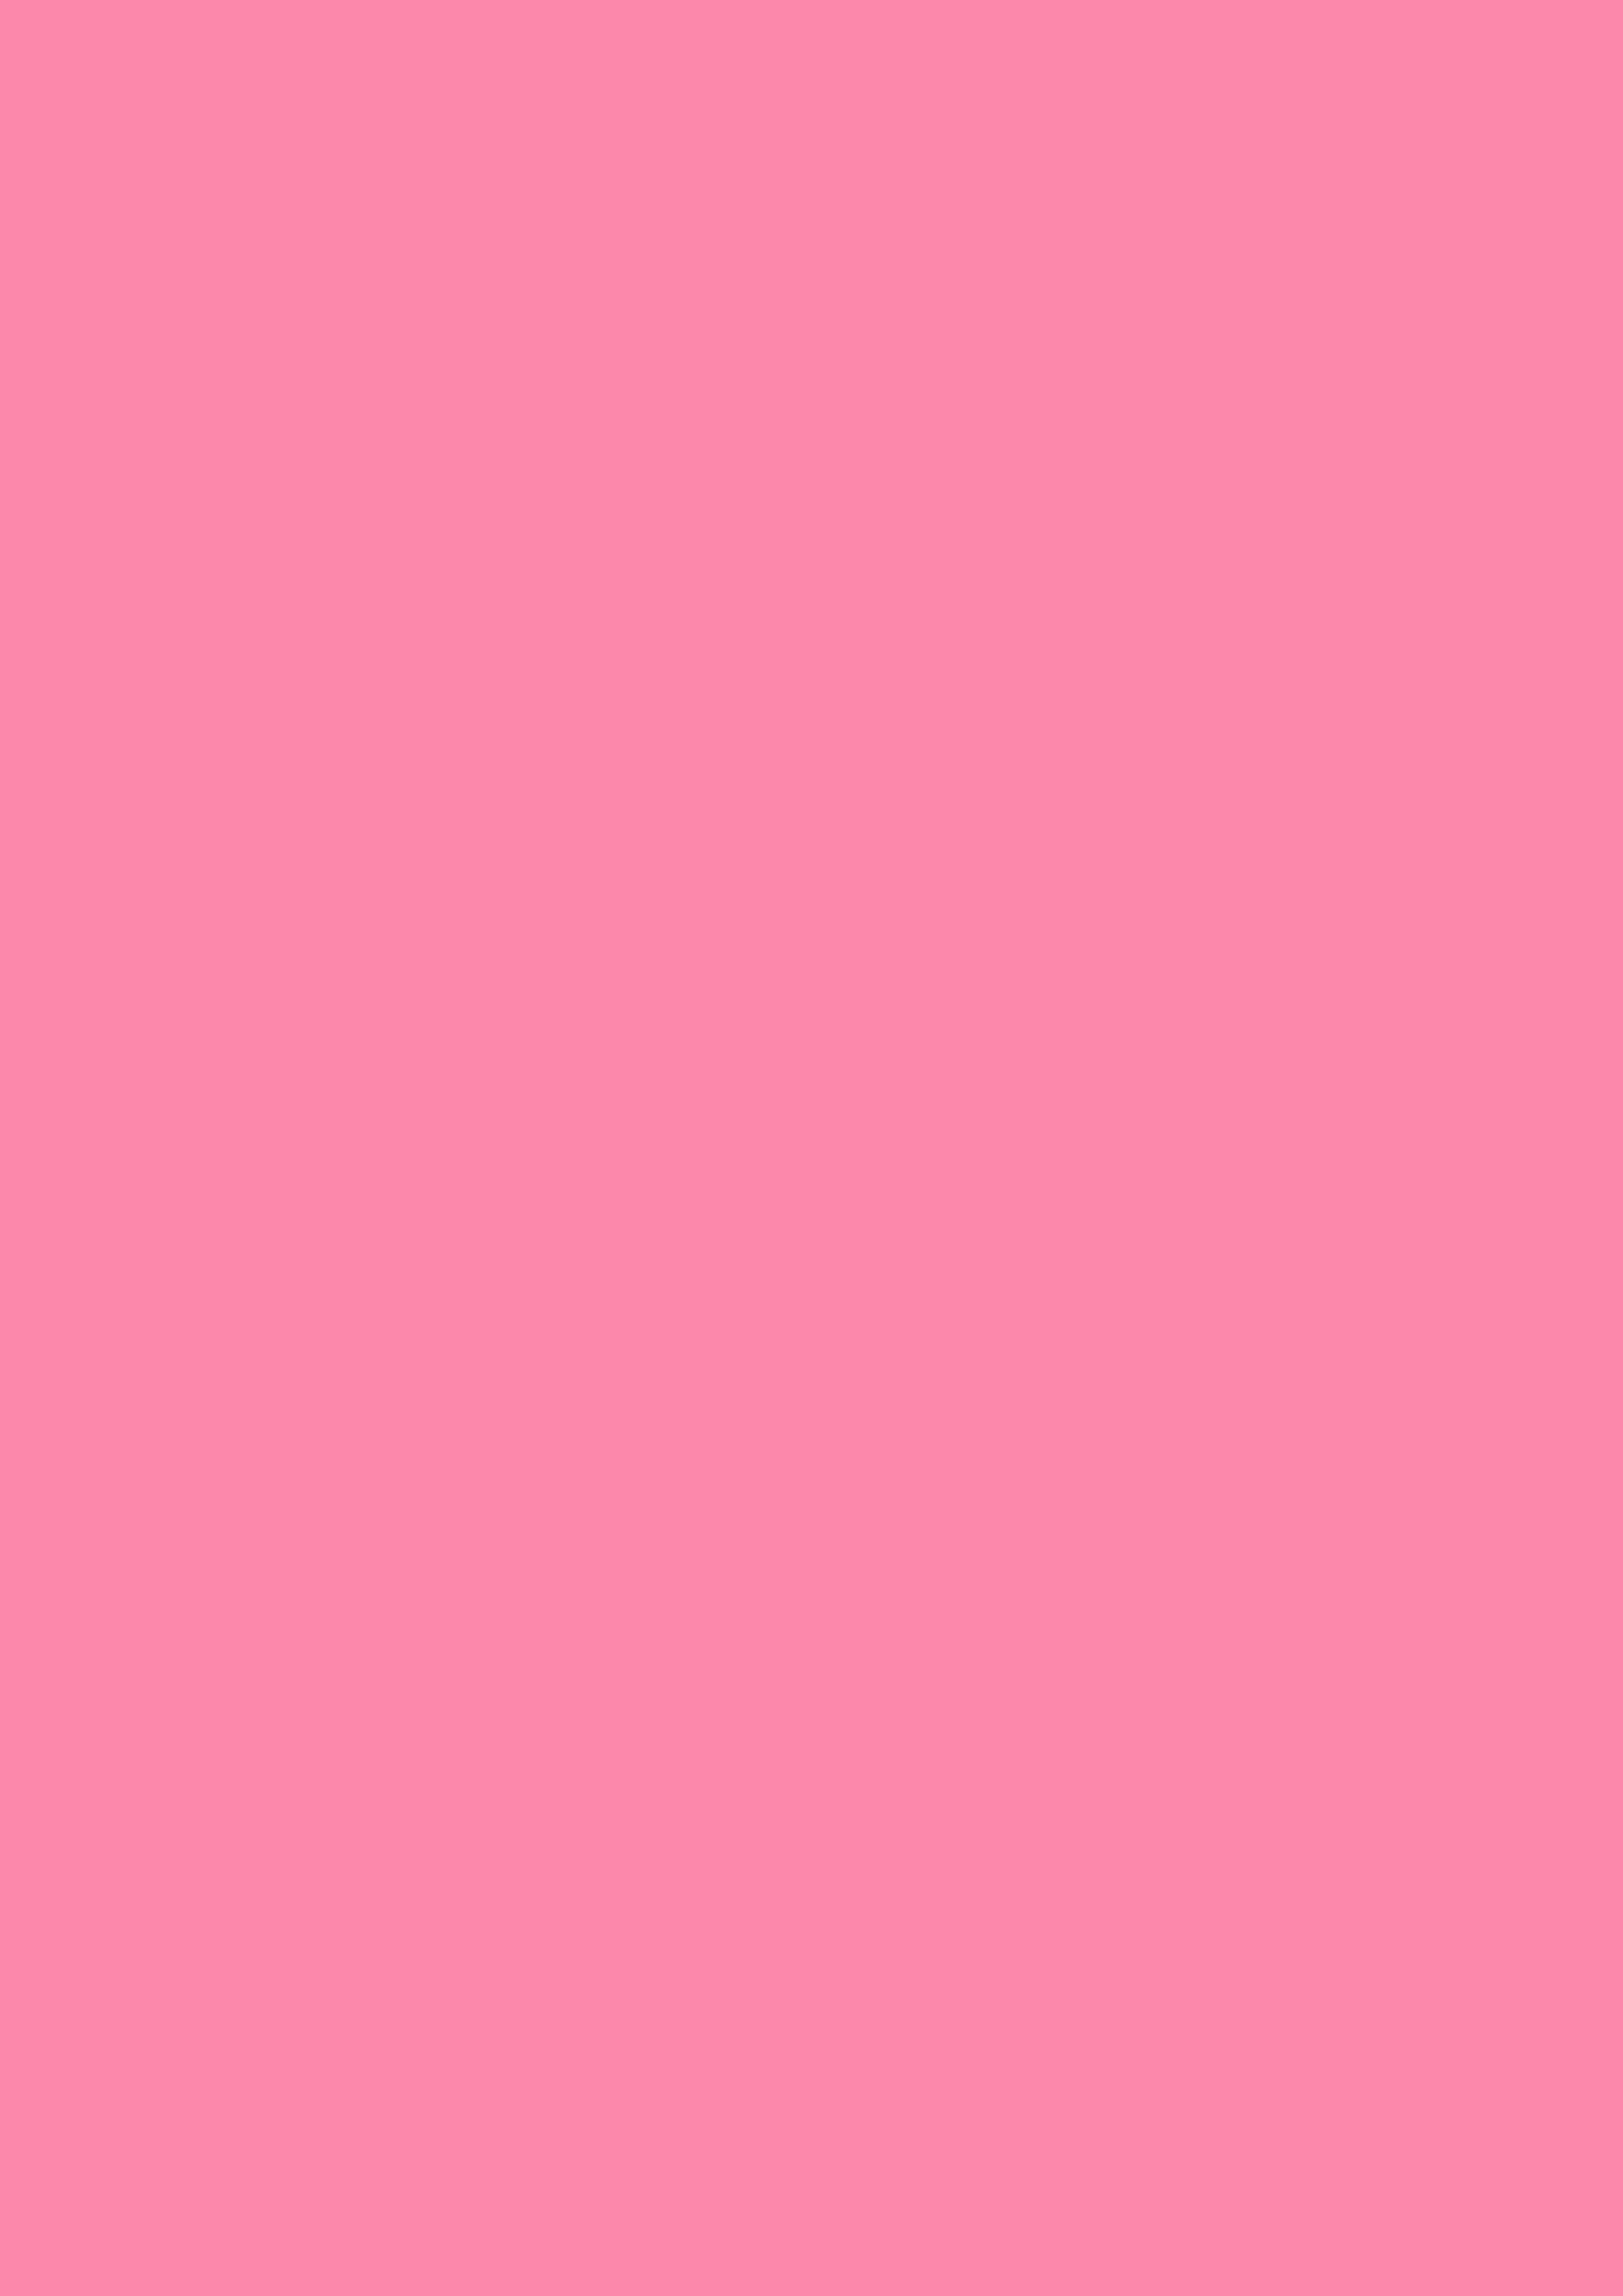 2480x3508 Tickle Me Pink Solid Color Background